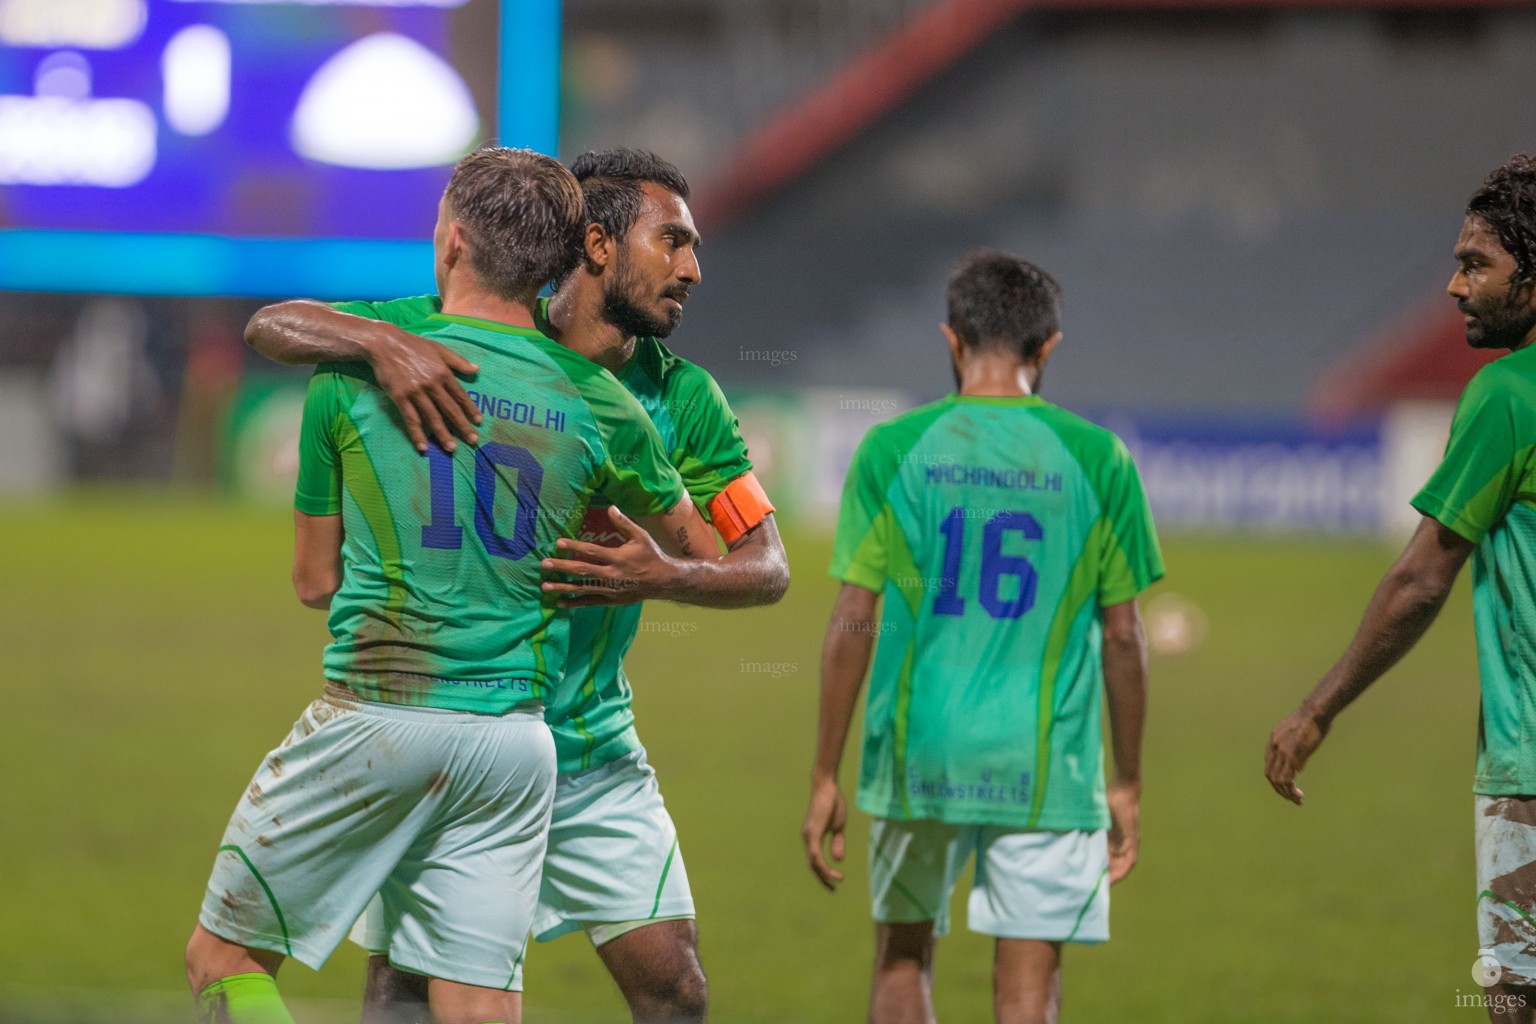 Green Street vs New Radiant Sports Club in the second round of STO Male League. Male , Maldives. Friday day 26 May 2017. (Images.mv Photo/ Abdulla Abeedh).
Green Street vs New Radiant Sports Club in the second round of STO Male League. Male , Maldives. Friday day 26 May 2017. (Images.mv Photo/ Abdulla Abeedh).